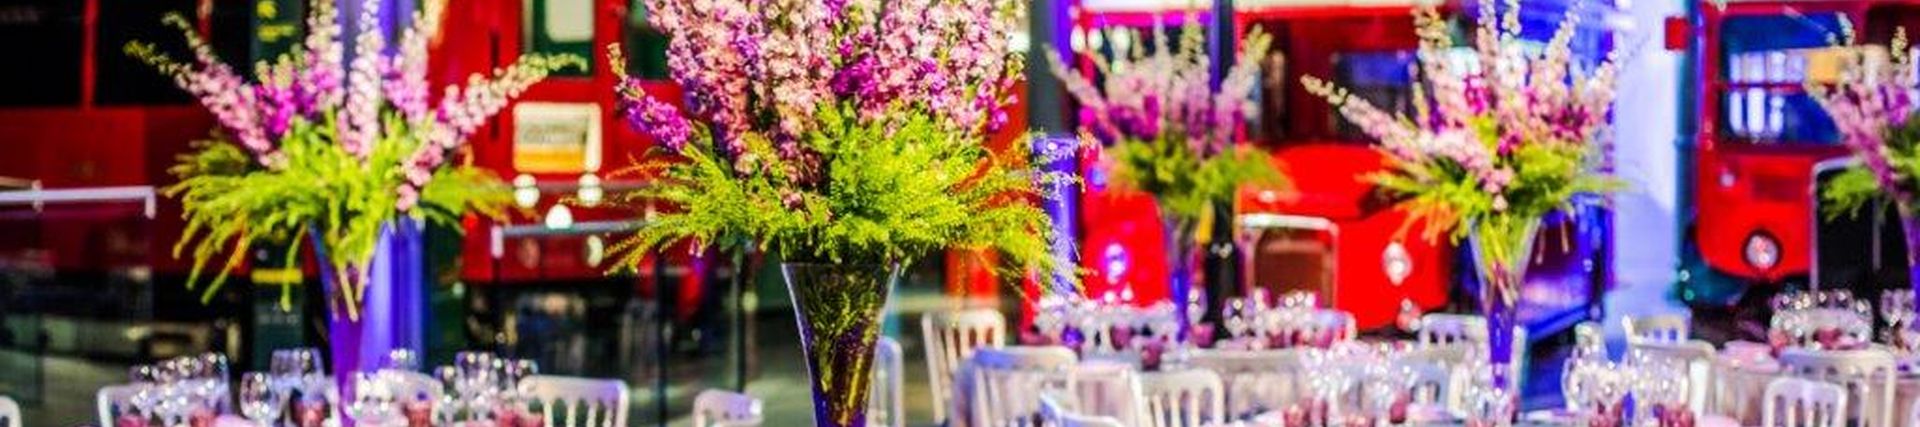 Elaborate flower displays on tables set with purple glasses in a museum in front of red London buses 